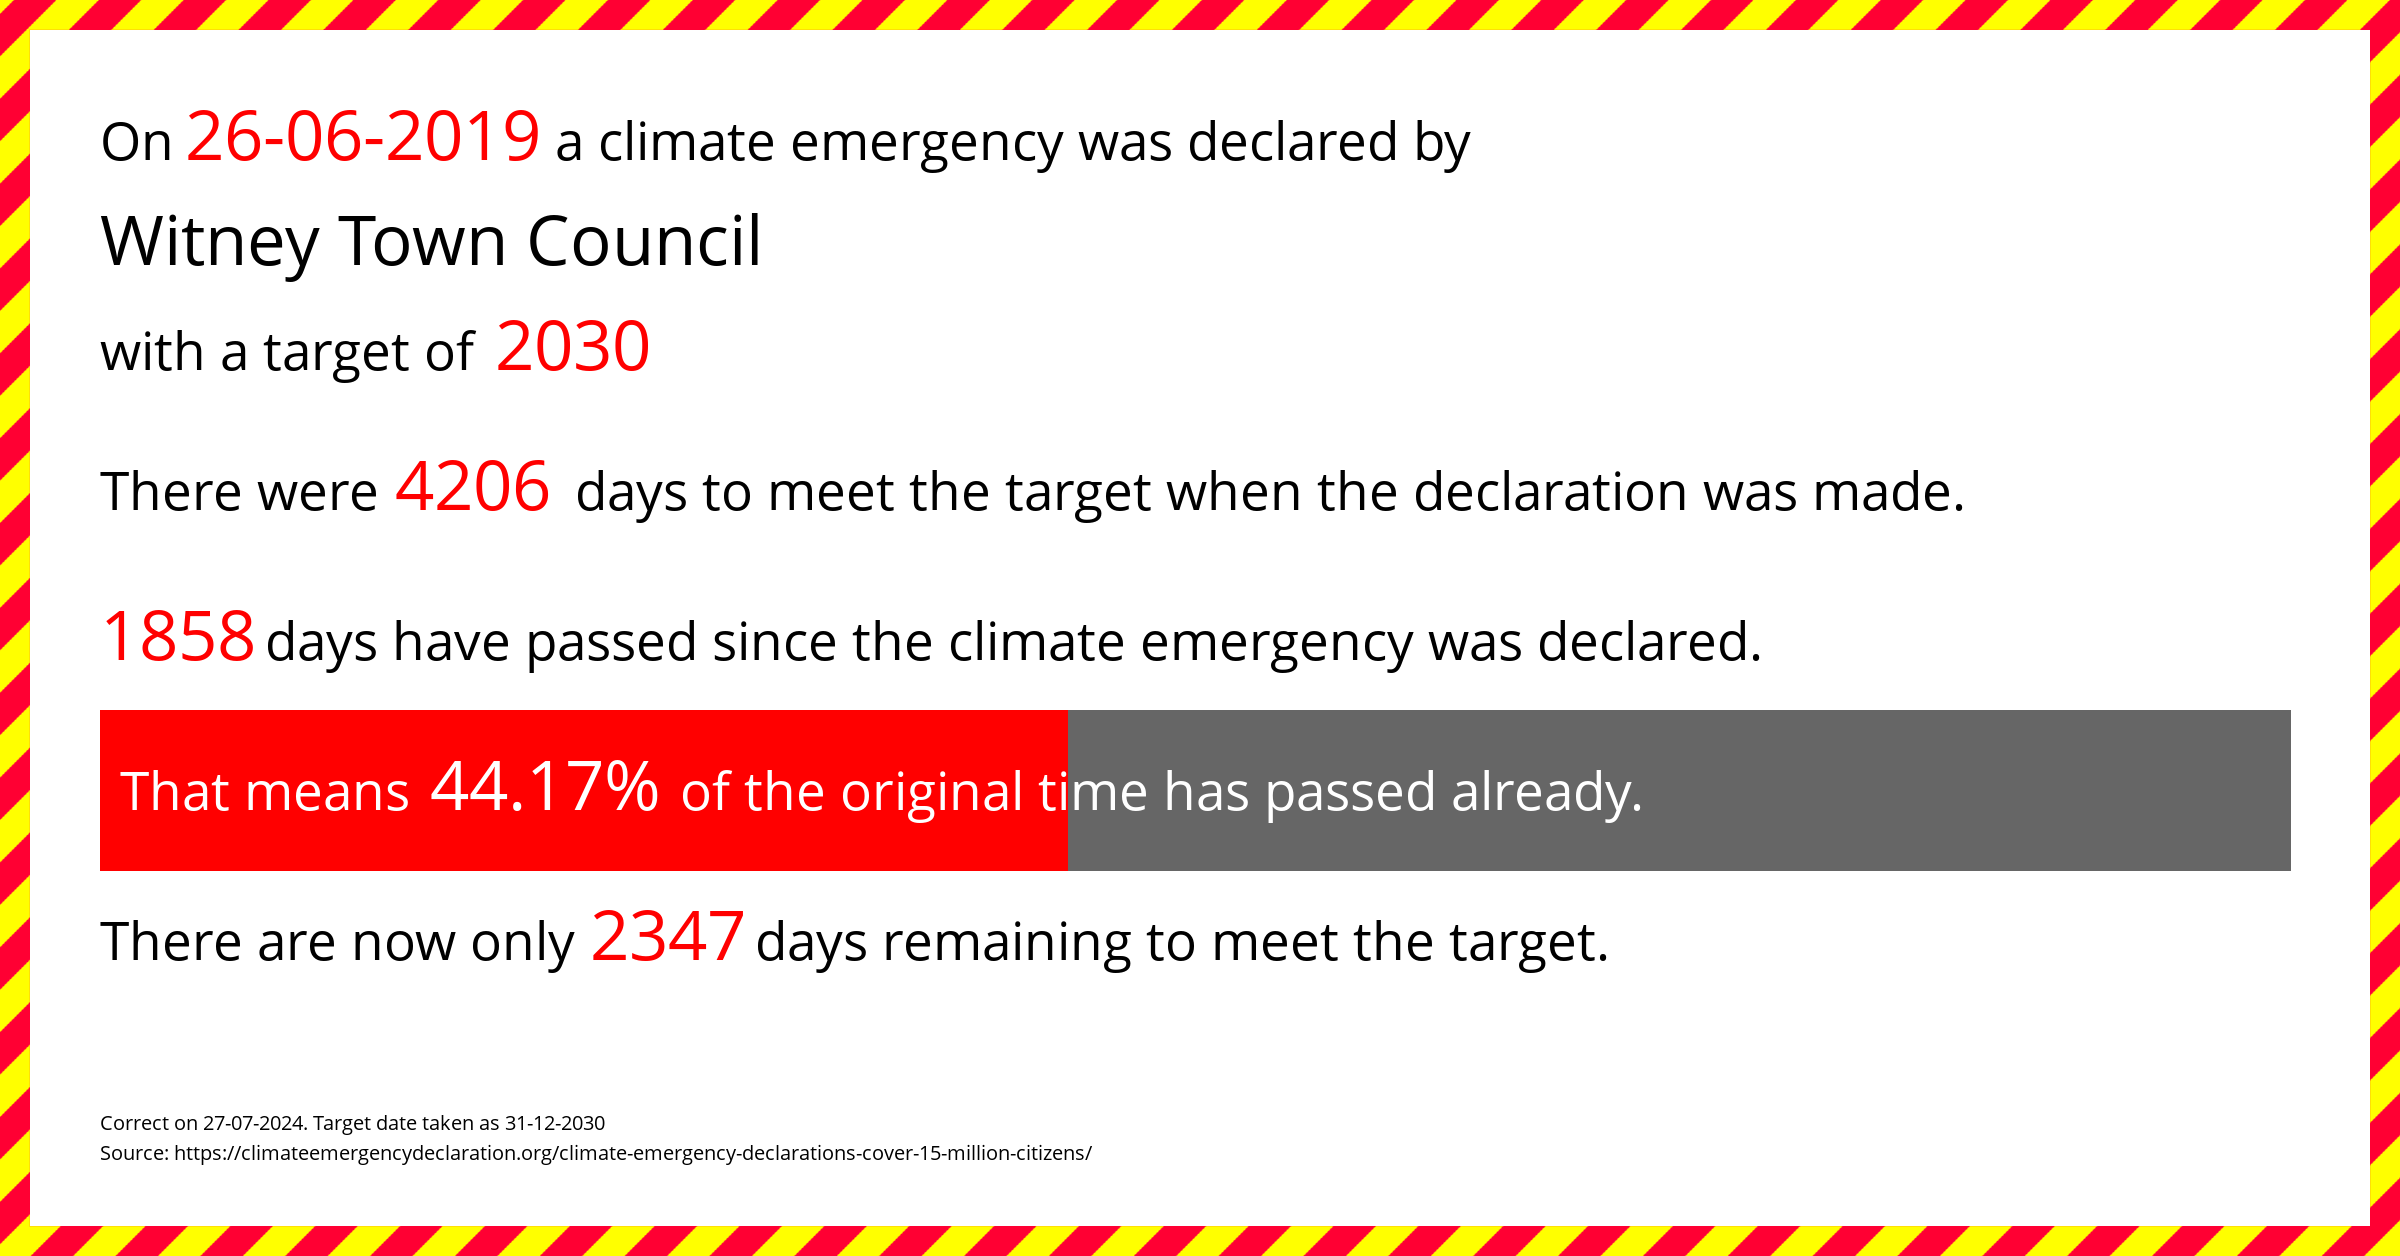 Witney Town Council declared a Climate emergency on Wednesday 26th June 2019, with a target of 2030.